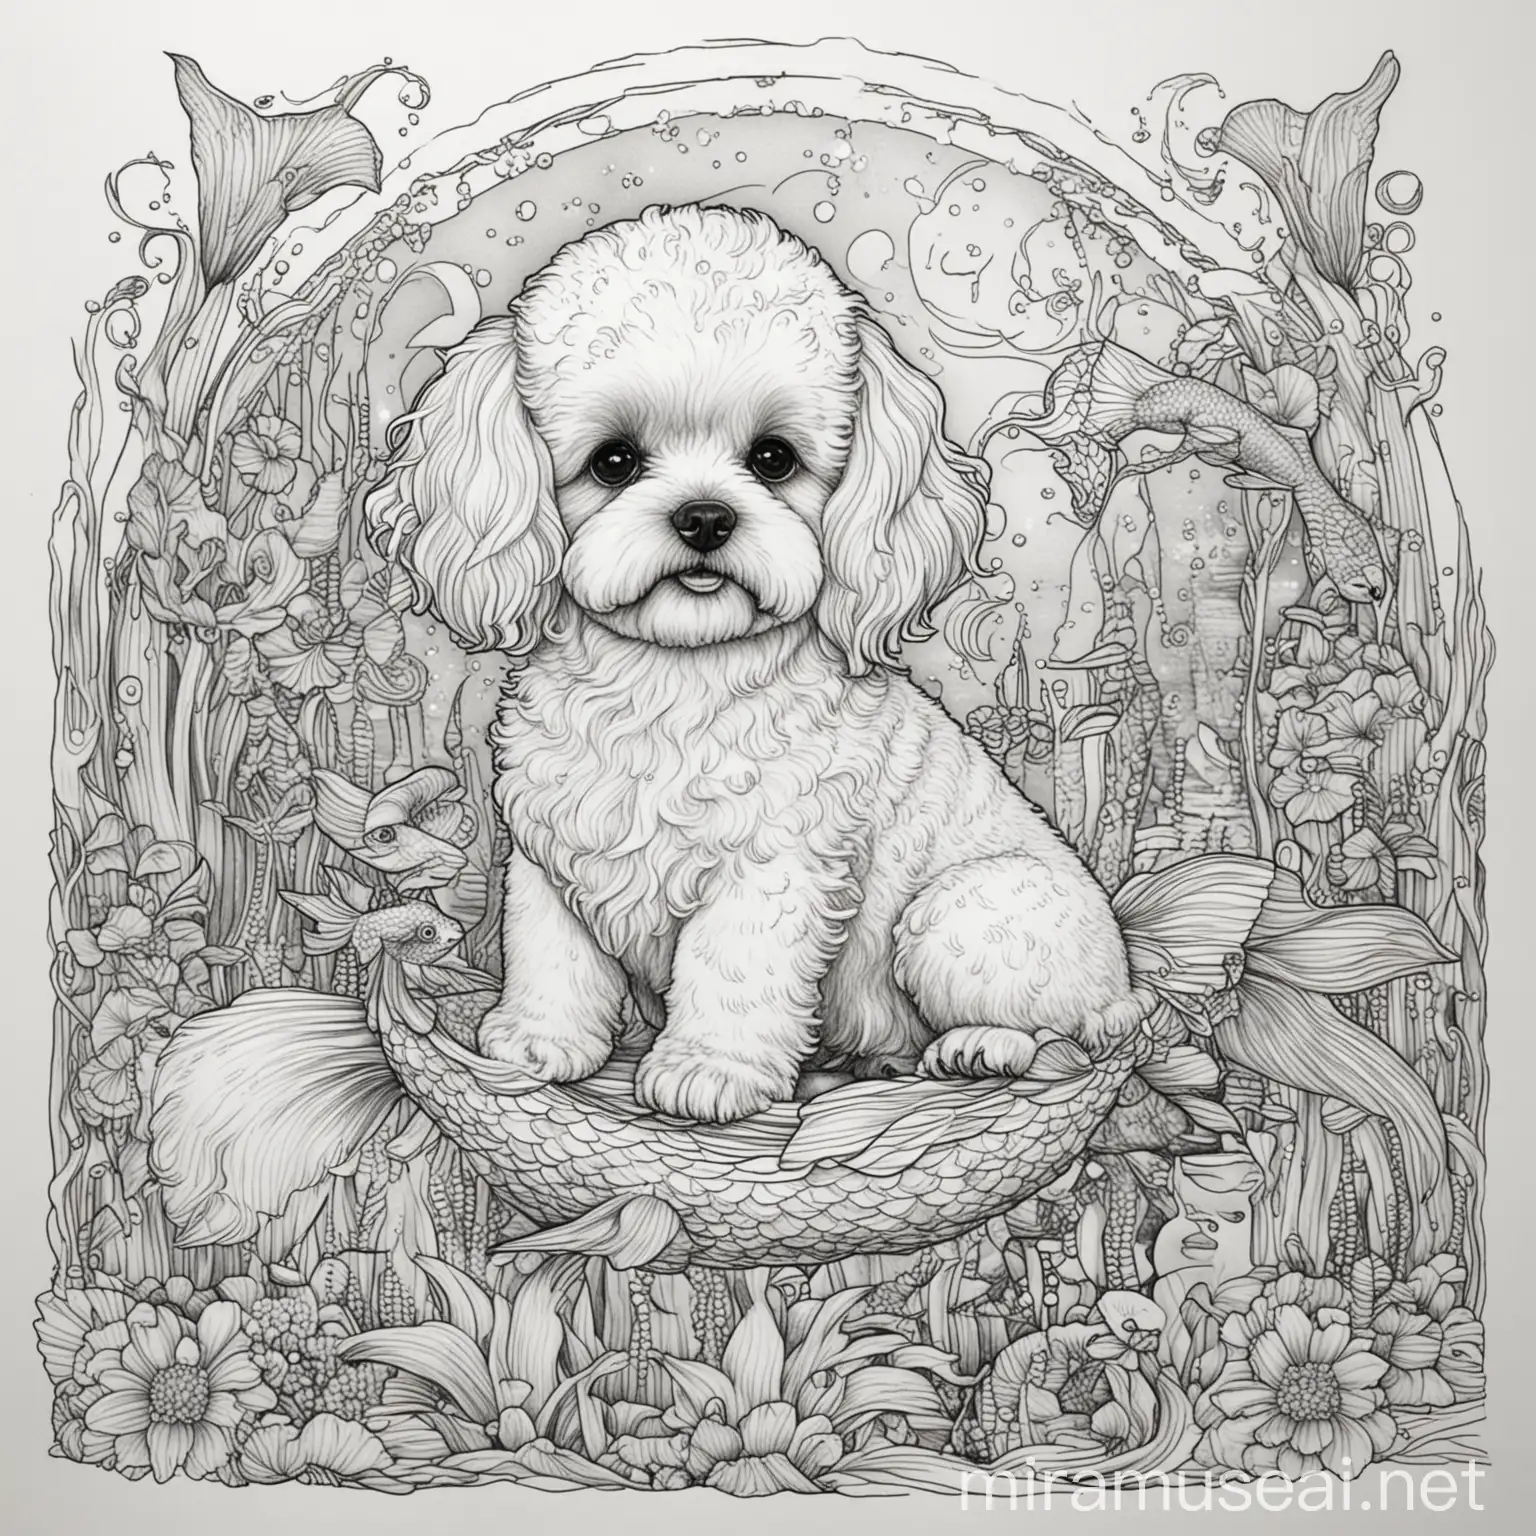 Enchanting Bichon Havanais Mermaid Coloring Book Page for Relaxation and Creativity